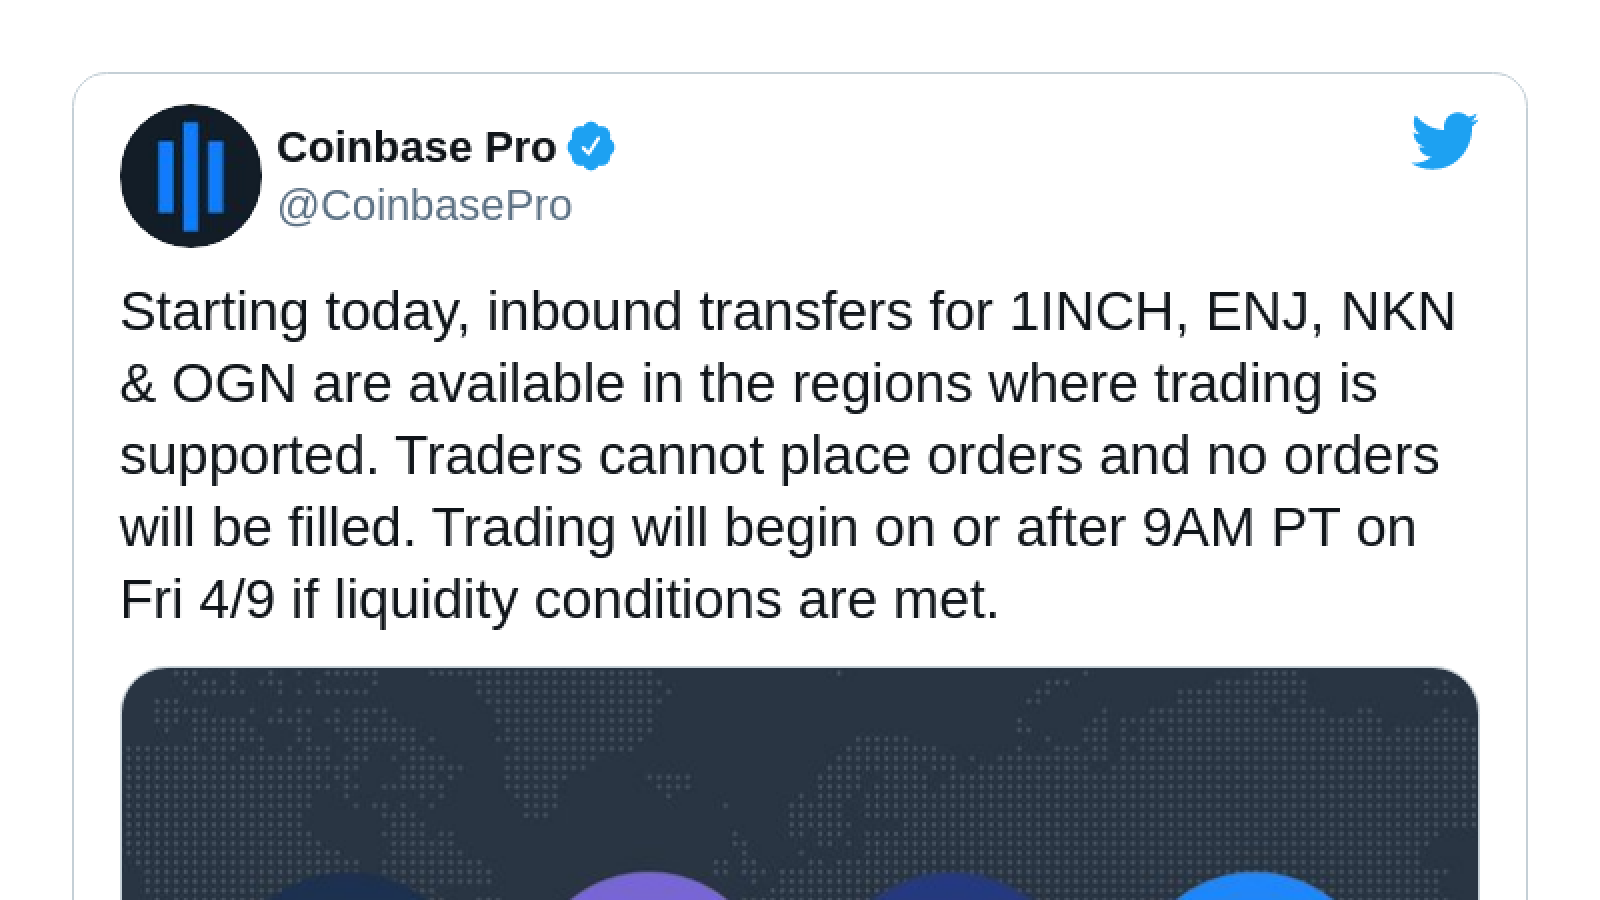 Enjin listed by Coinbase